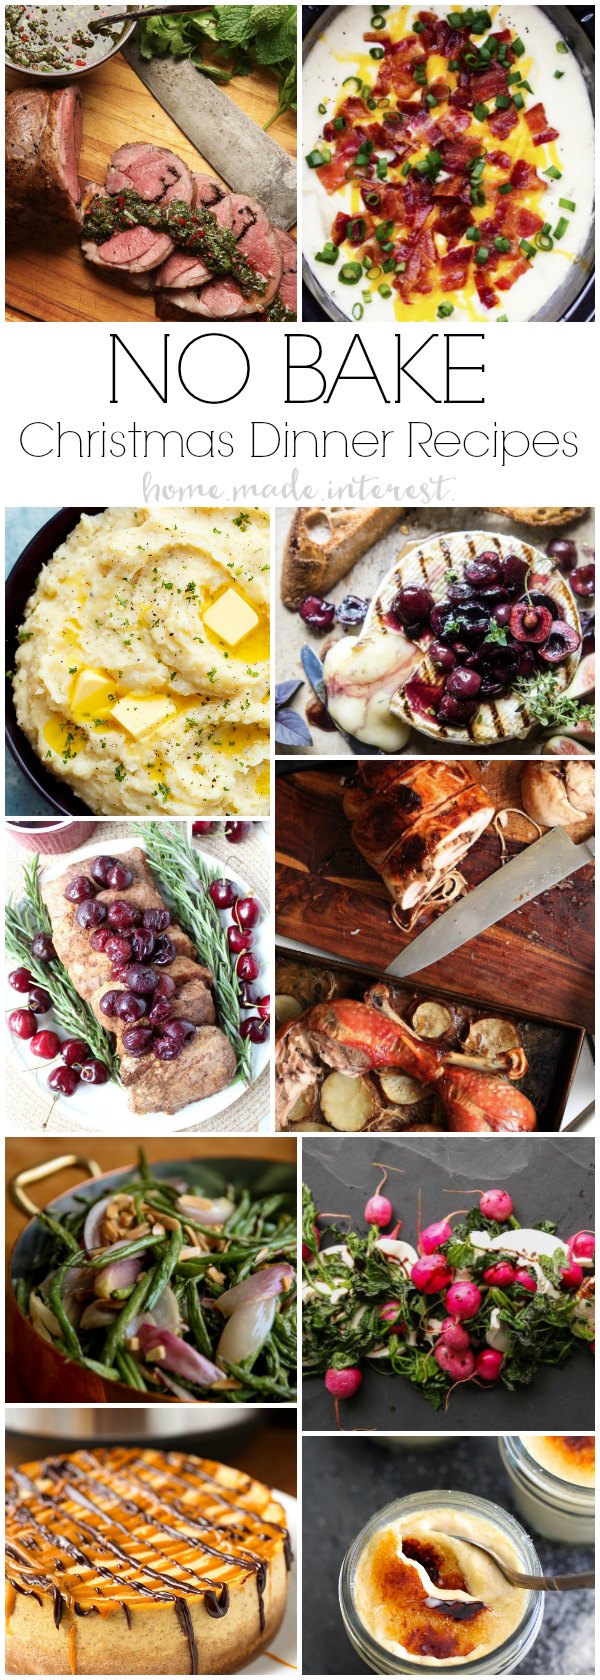 No-Bake Christmas Dinner Recipes that are made in the slow cooker, instant pot, rice cooker, sous vide. 